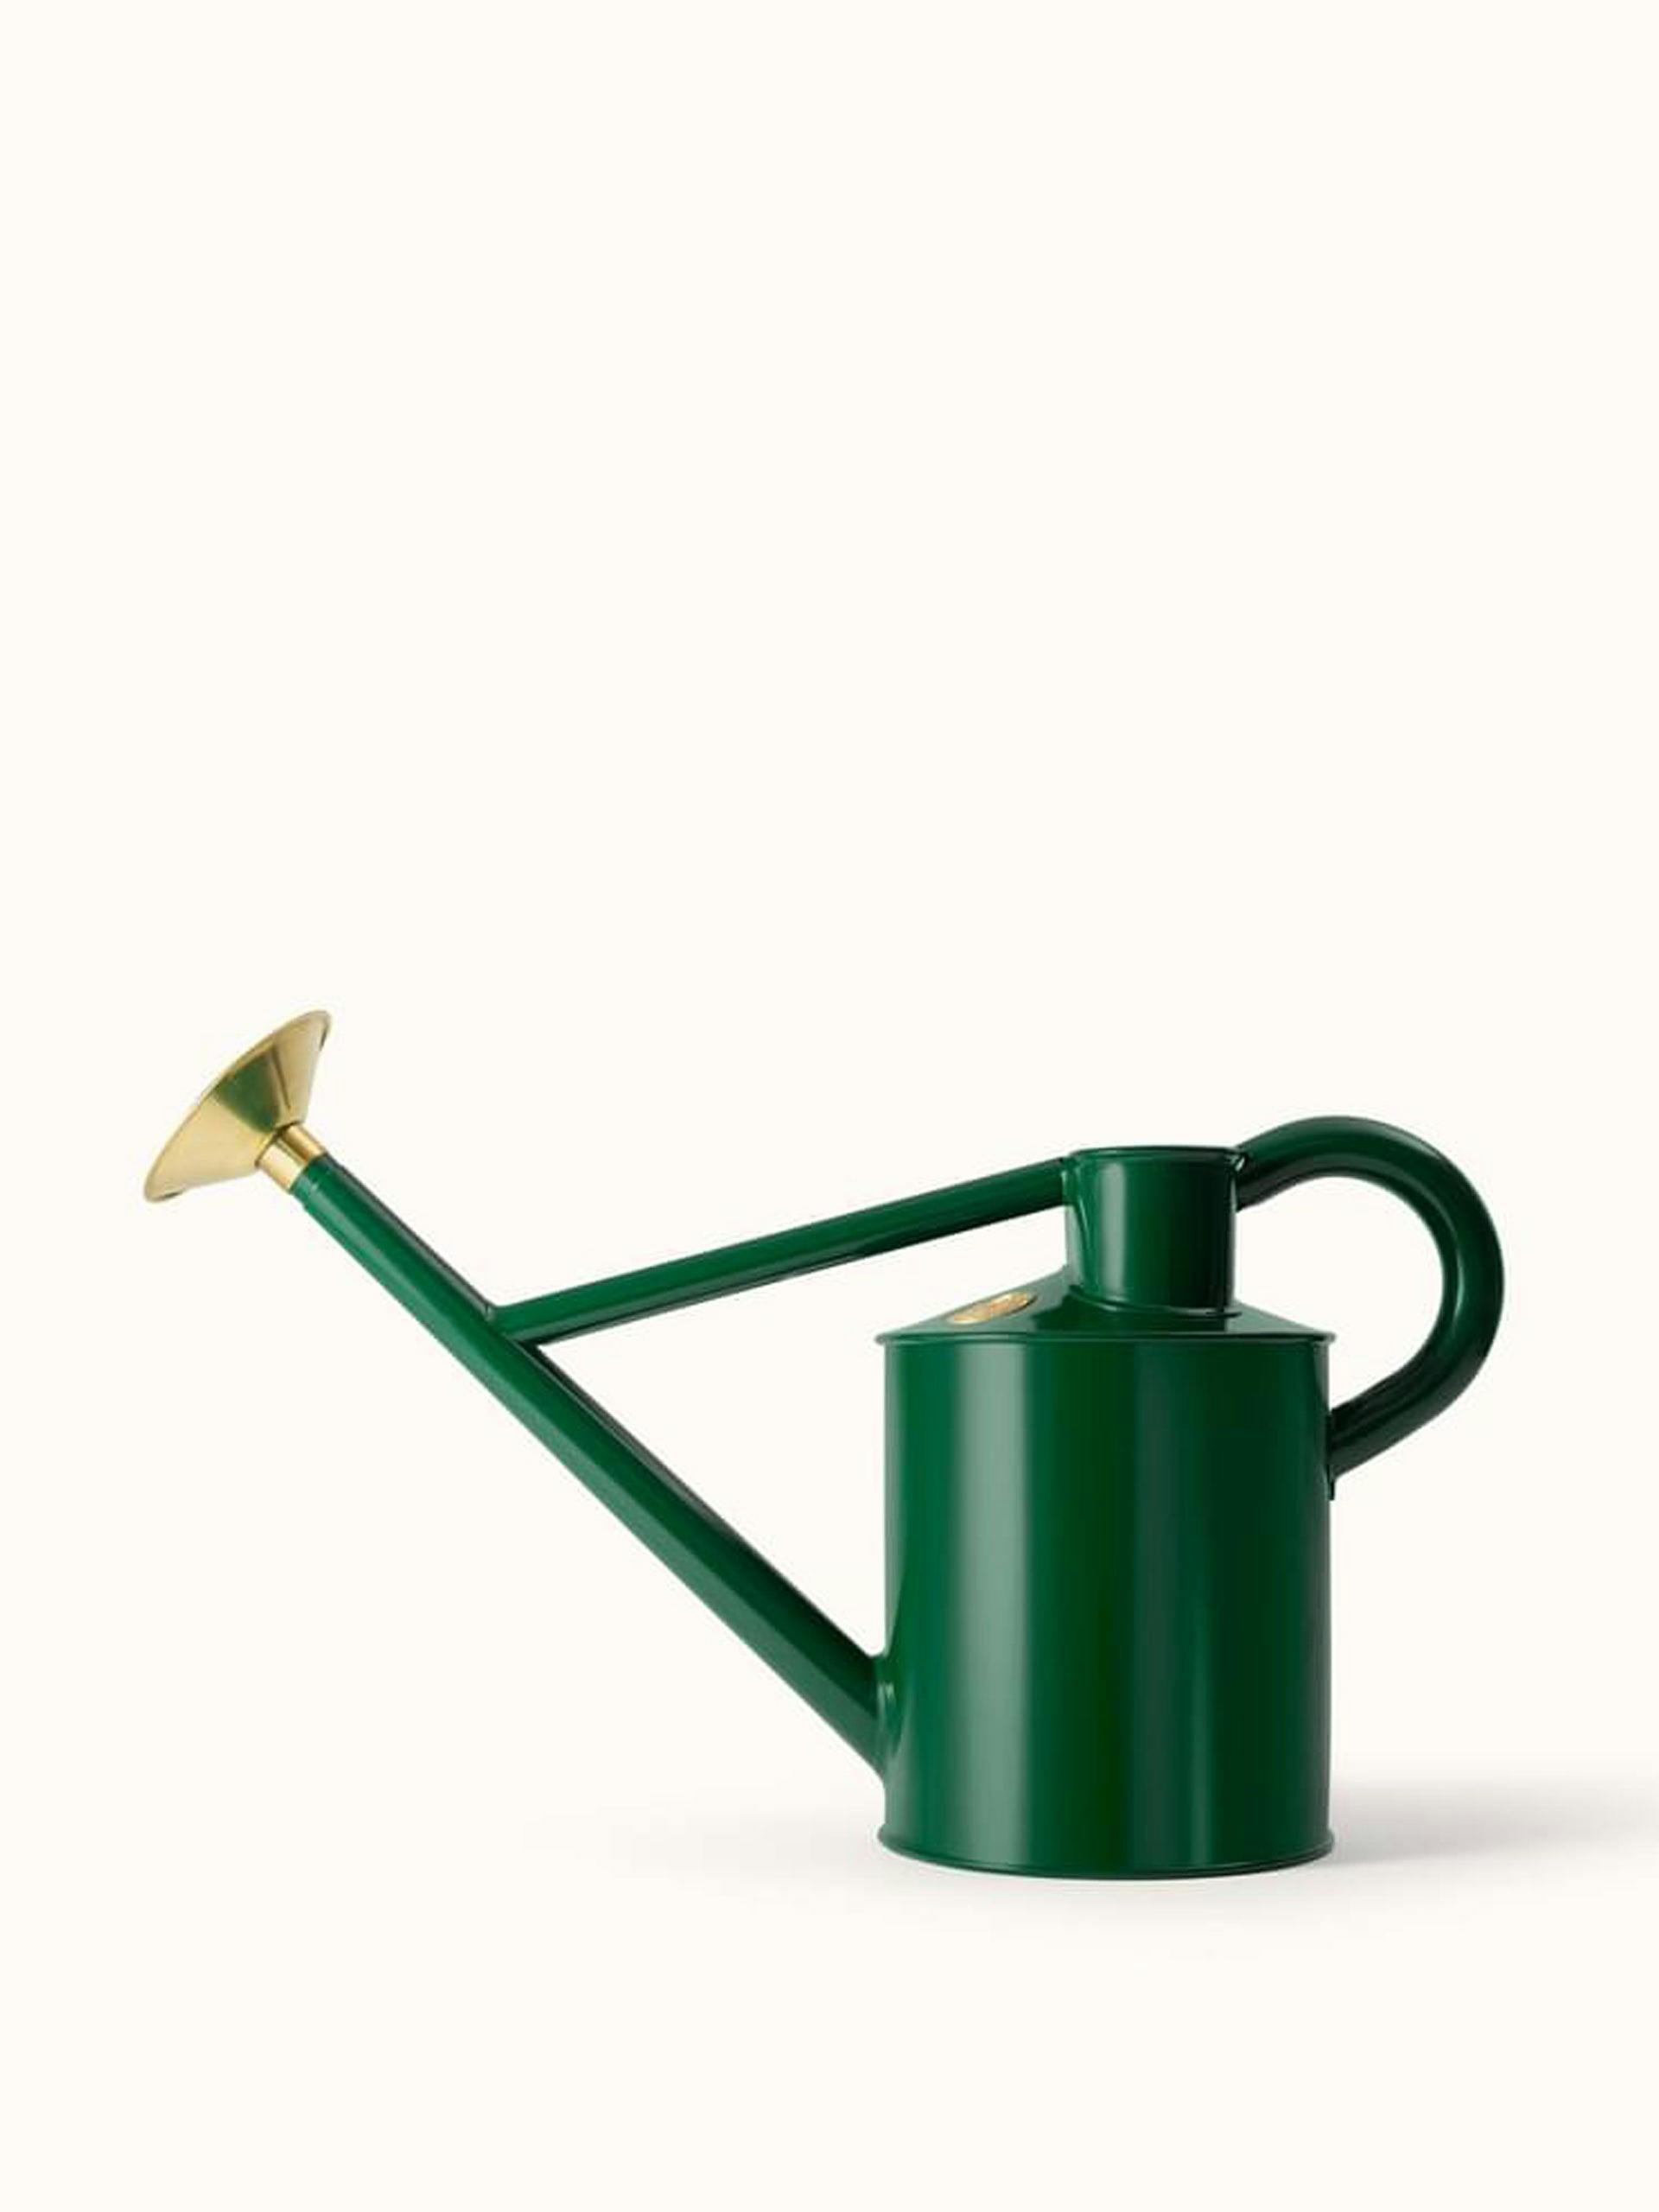 Two gallon green watering can